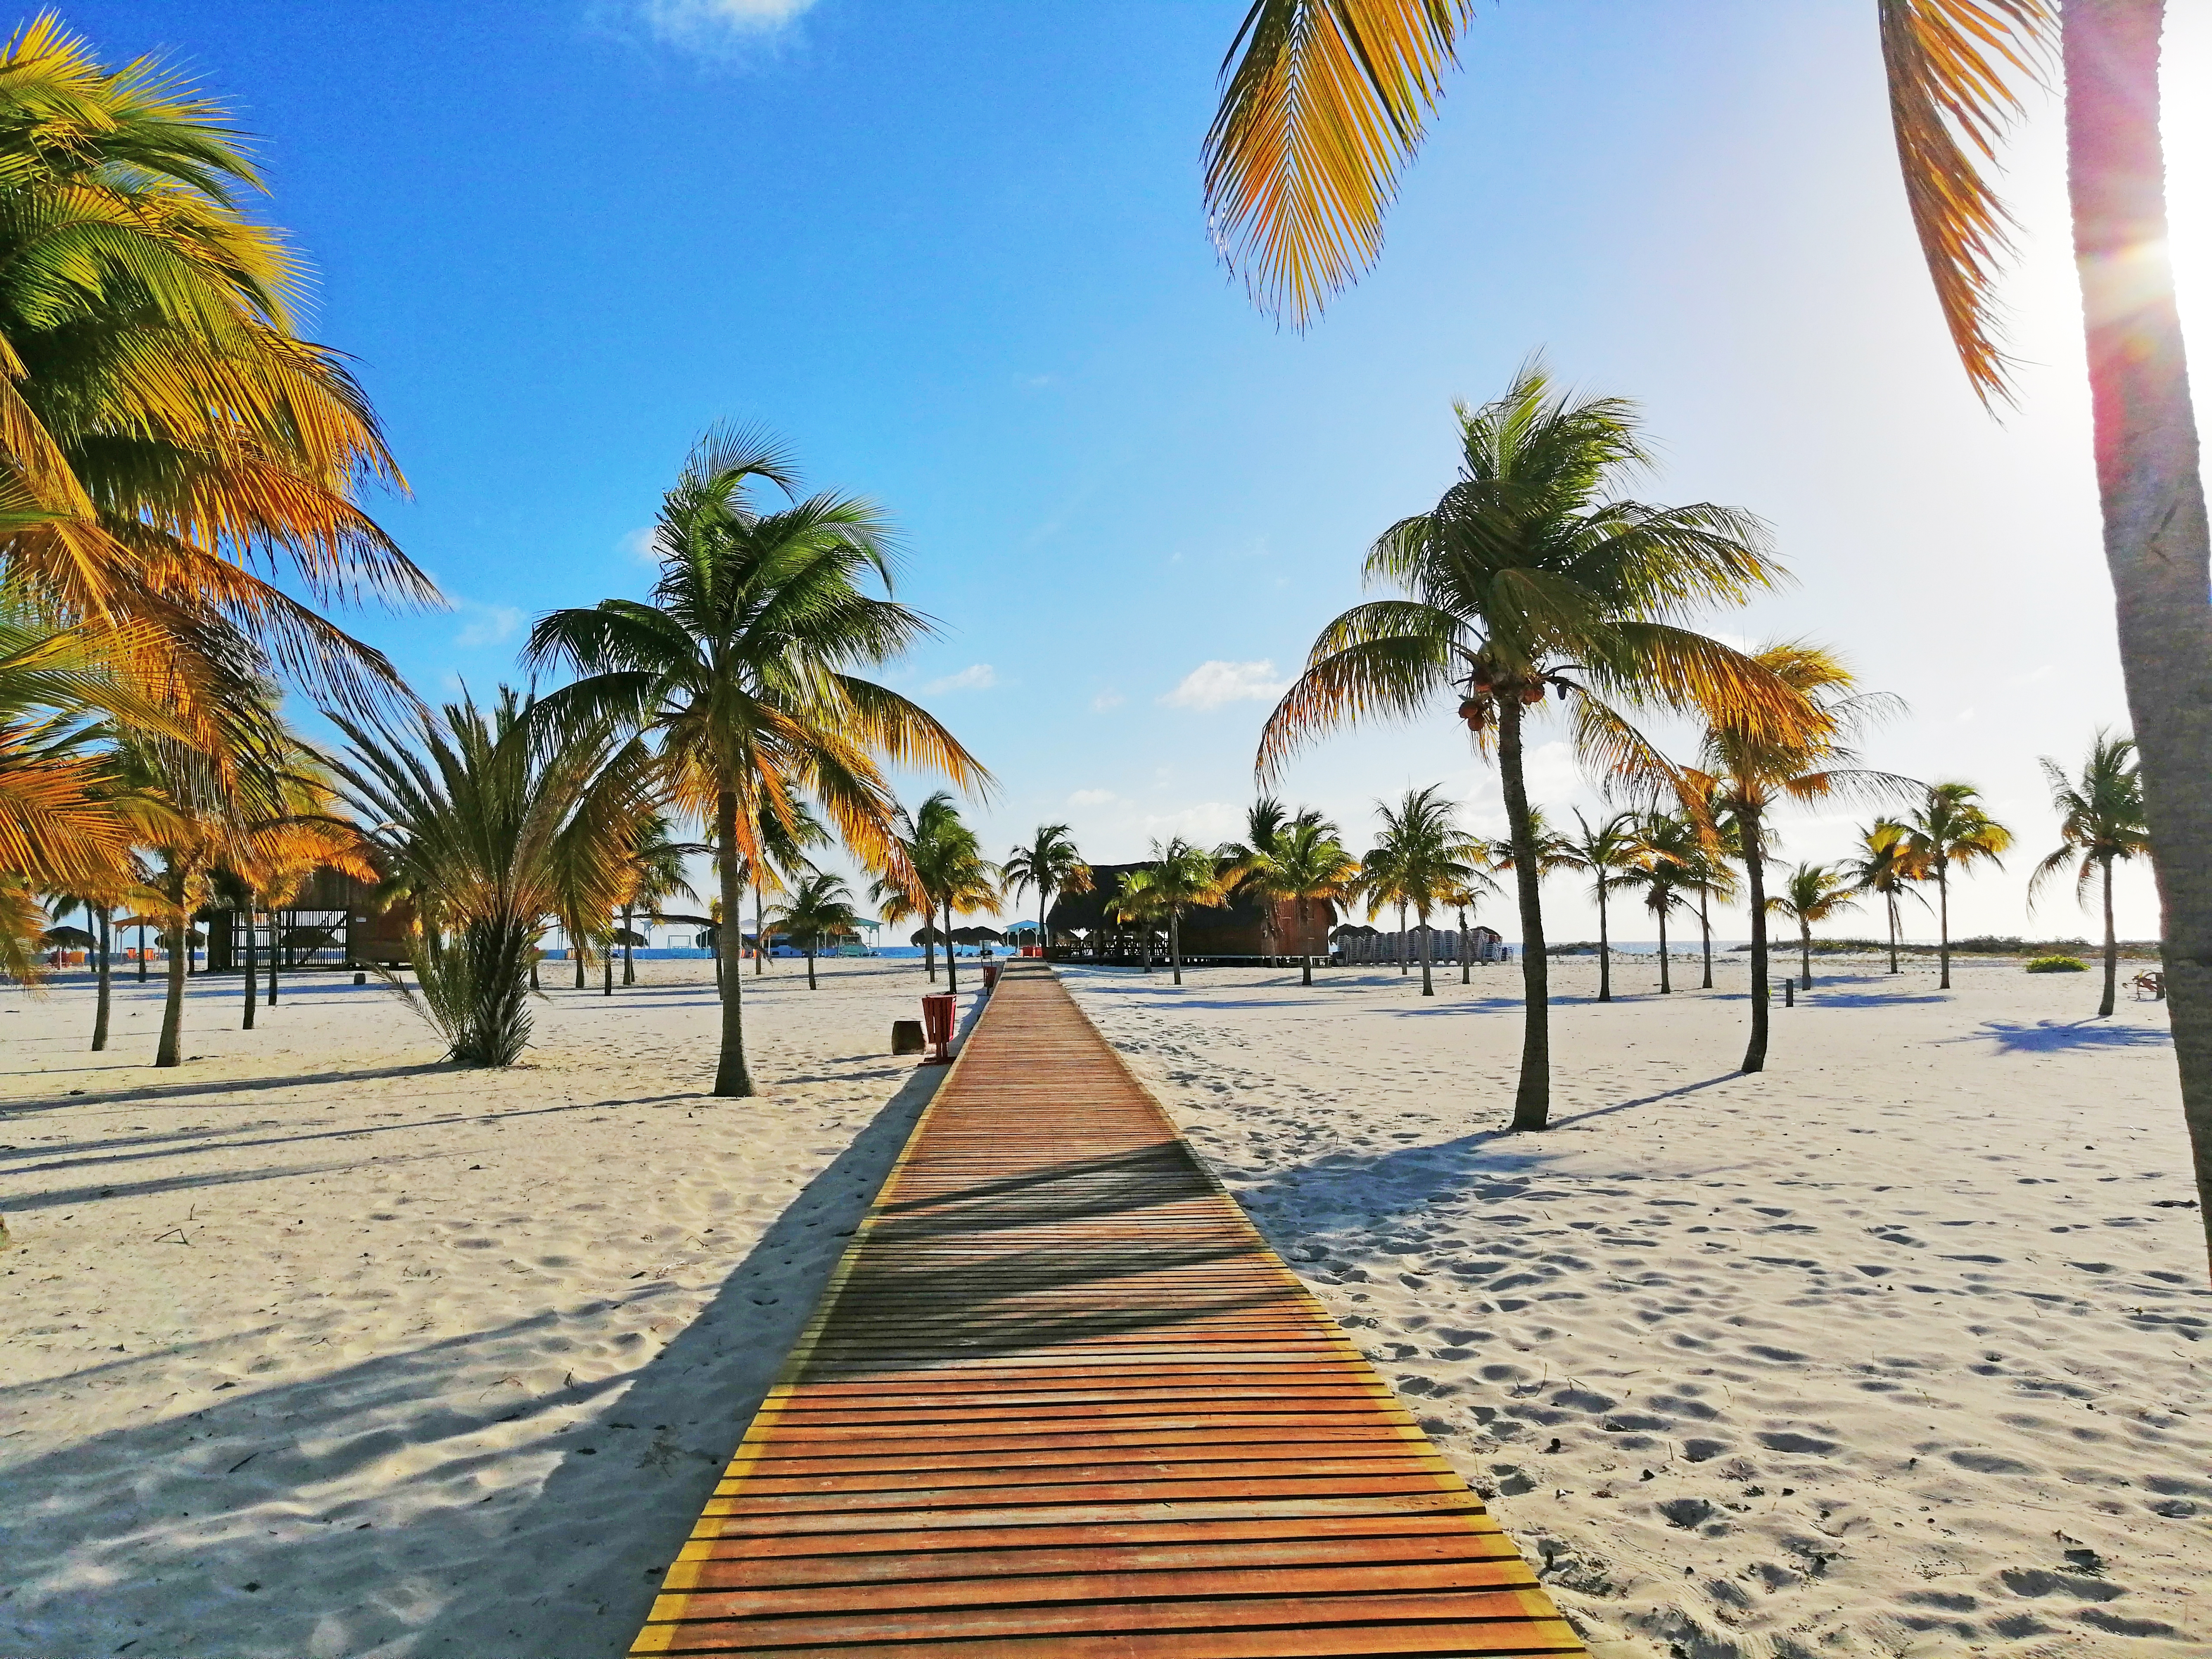 Cayo Largo beach with palm trees and wooden pathway